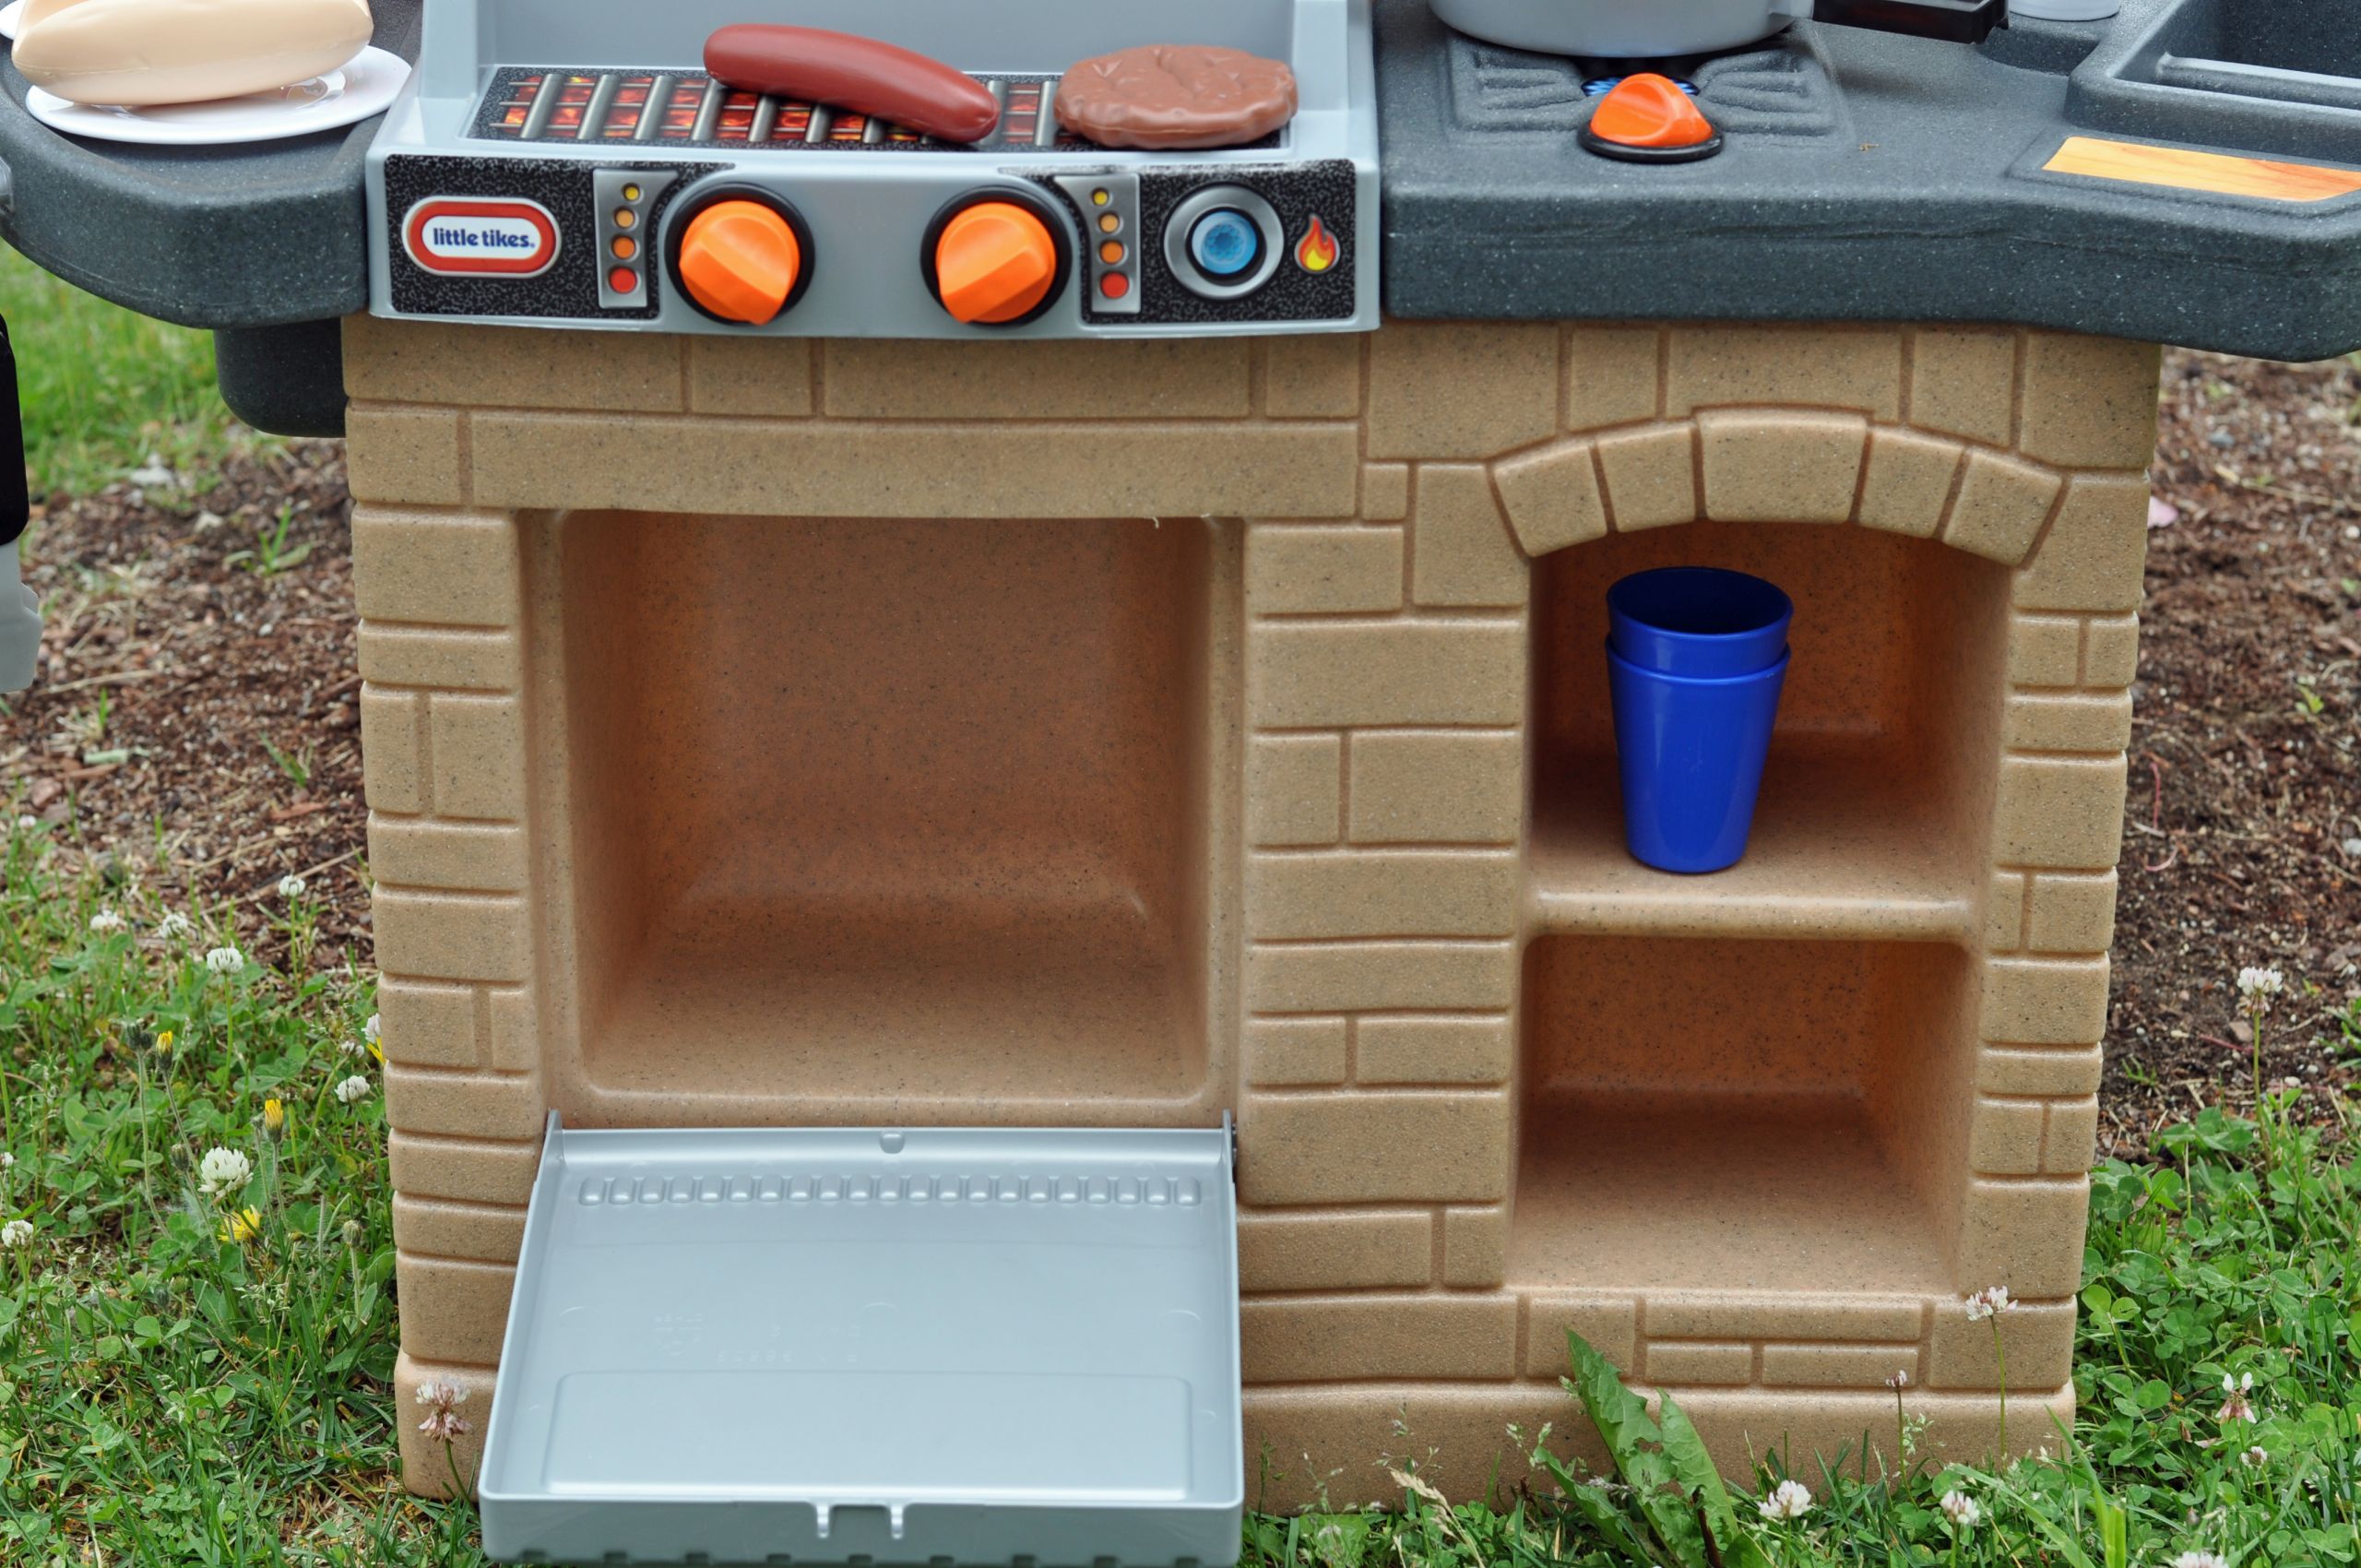 Lil Tikes Backyard Bbq
 Anytime Is Grilling Time With The New Little Tikes Cook n